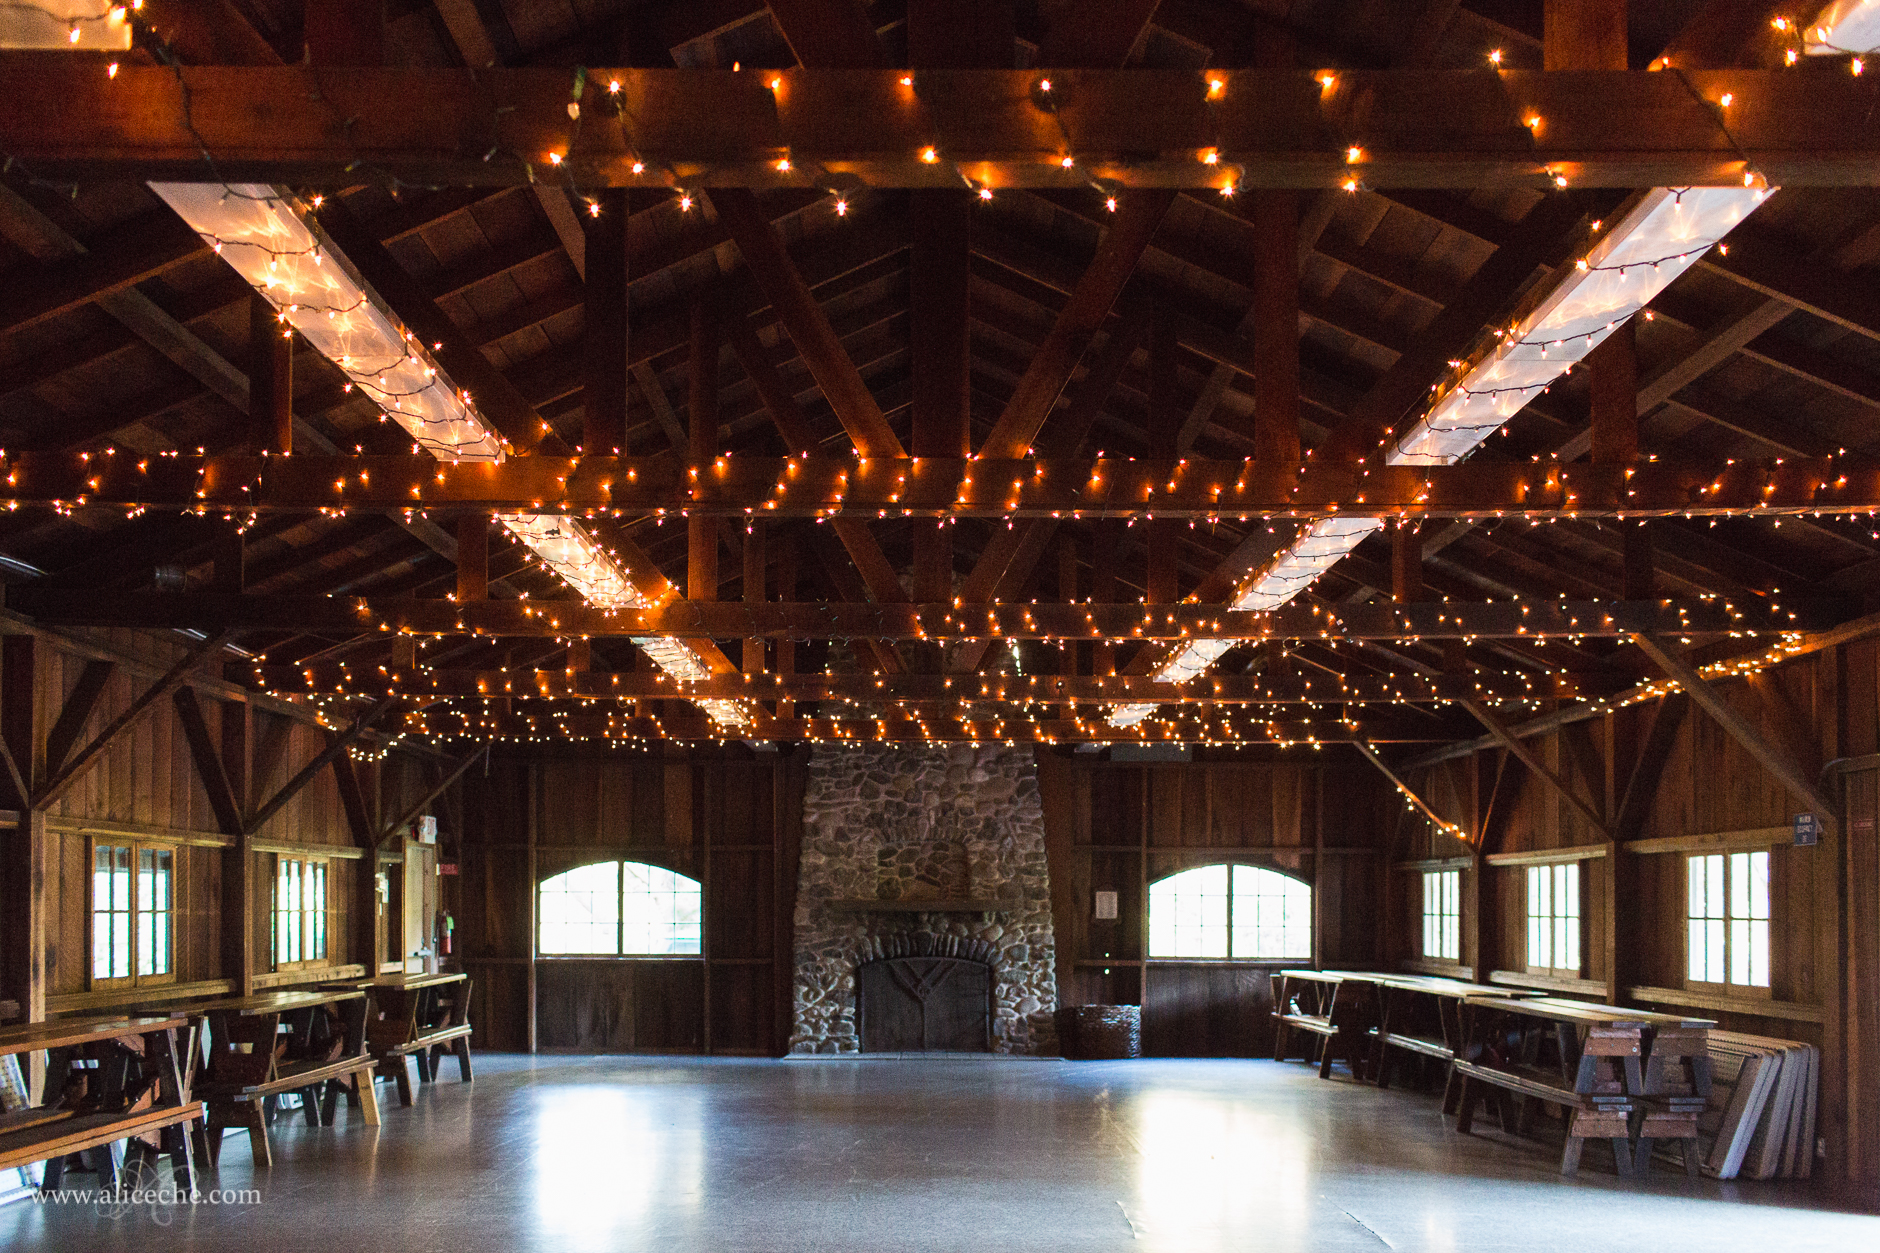 OVY Camp + Event Center Wedding Reception with Twinkle Lights in Rafters